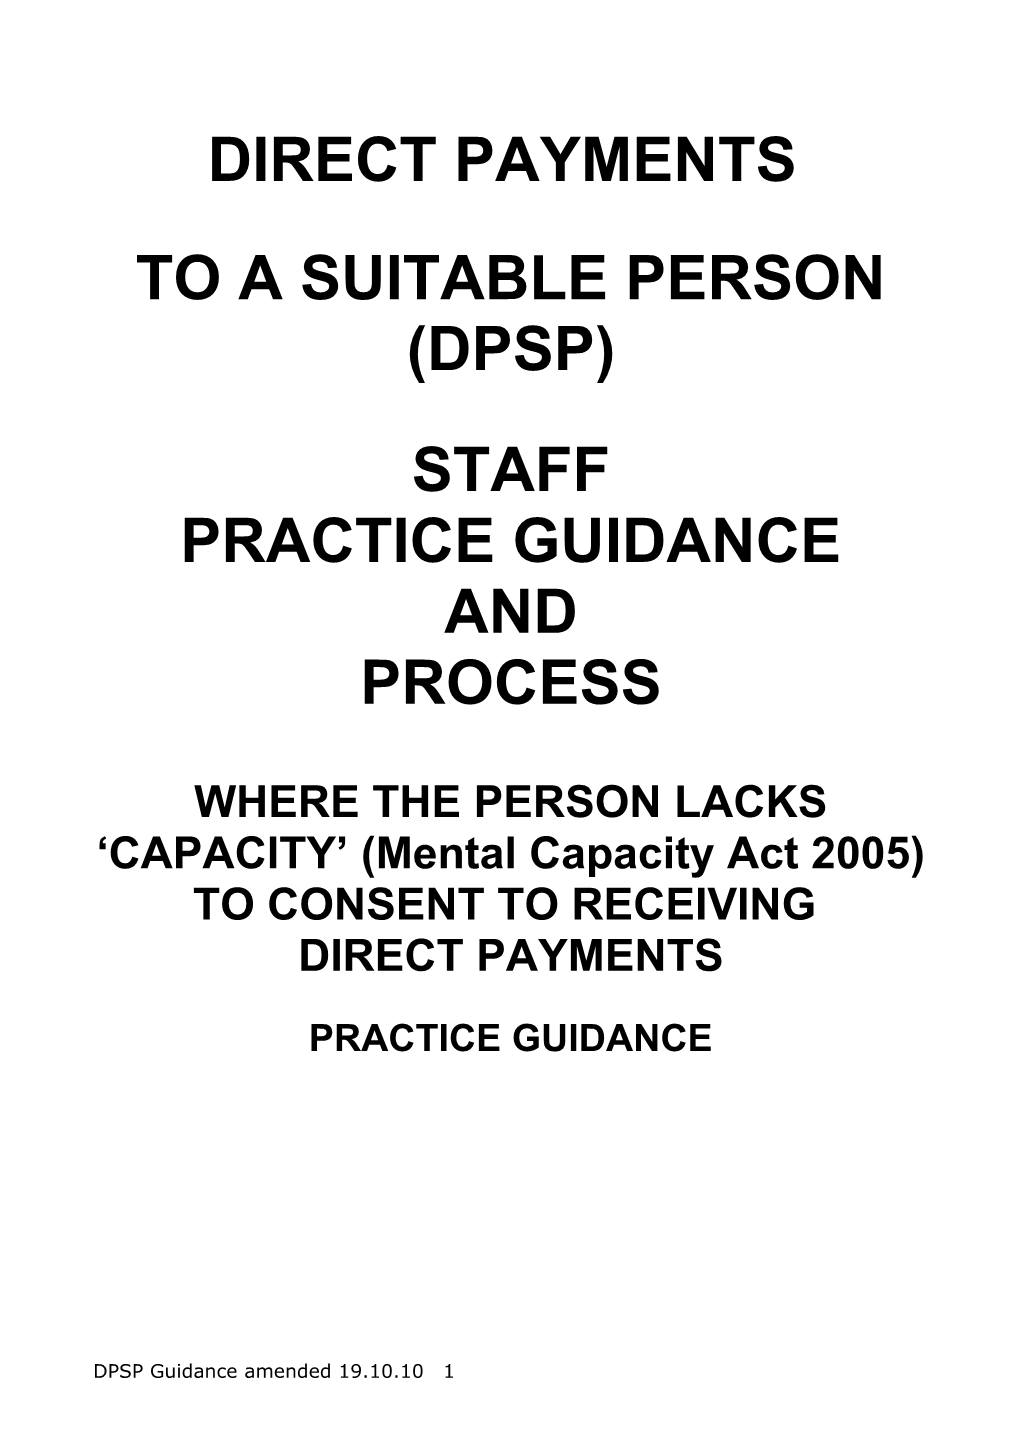 WHERE the PERSON LACKS CAPACITY (Mental Capacity Act 2005) to CONSENT to RECEIVING